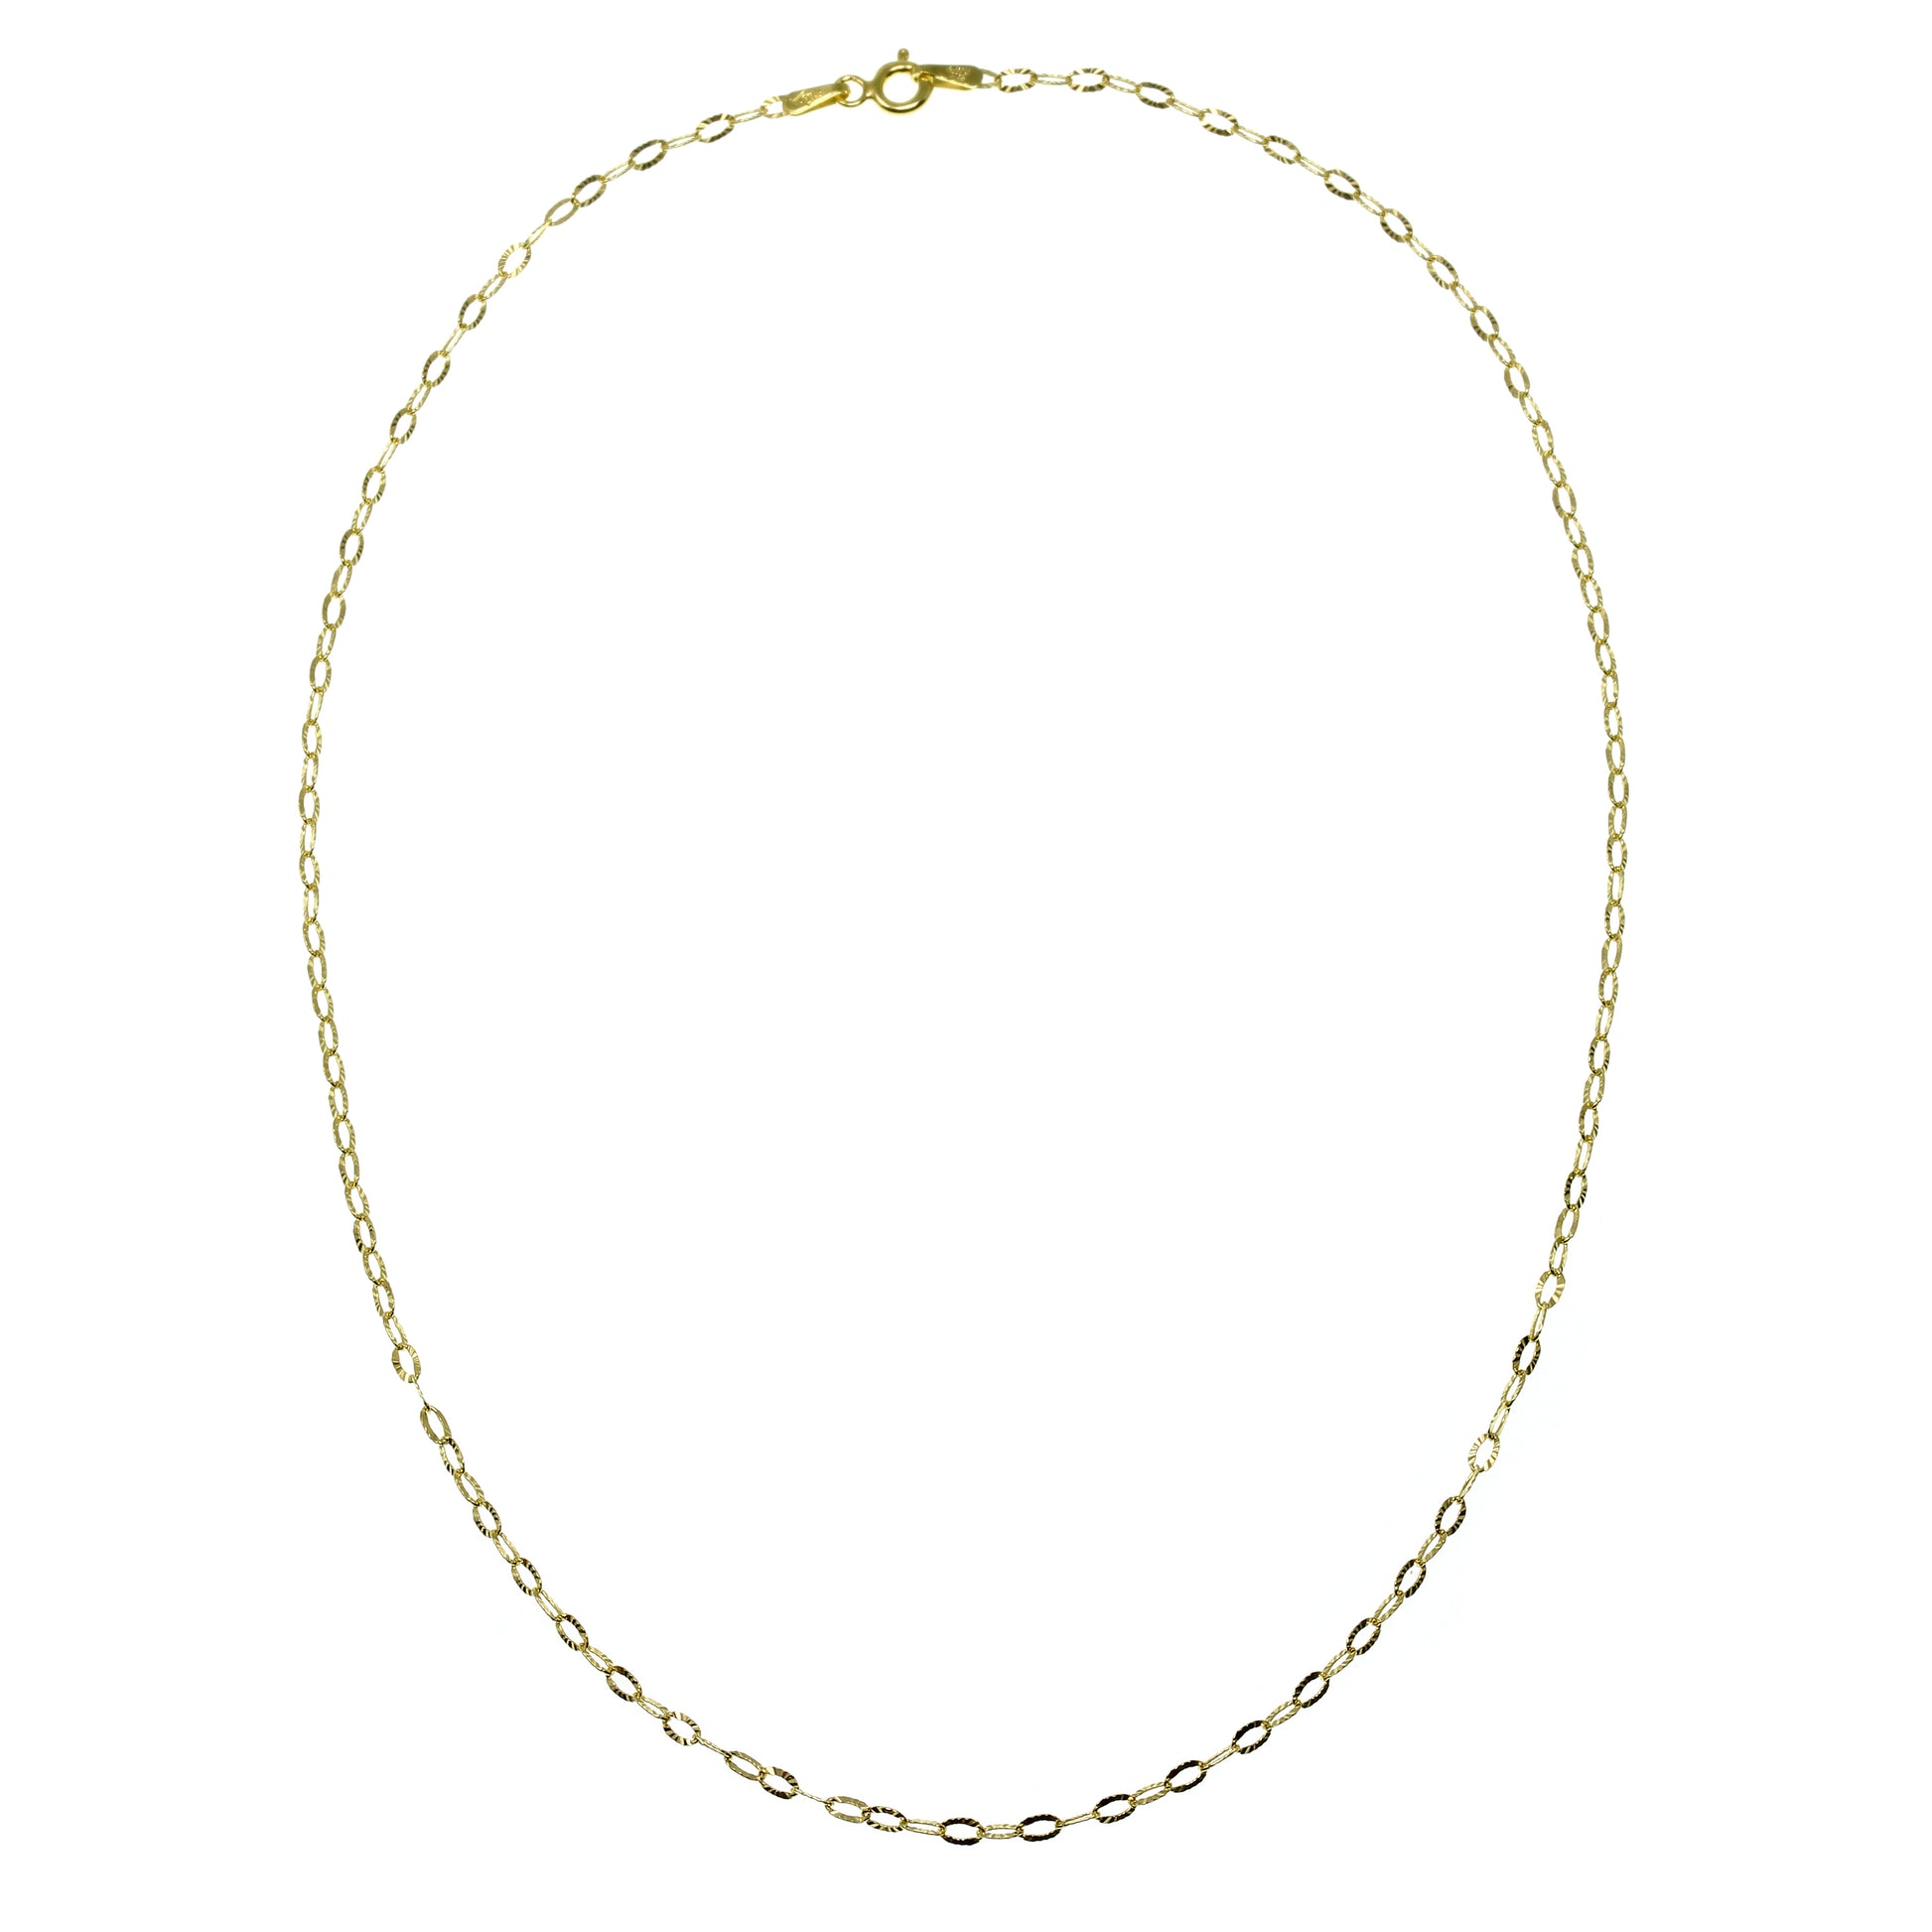 
18kt Gold Plated on Silver Chain Necklace

